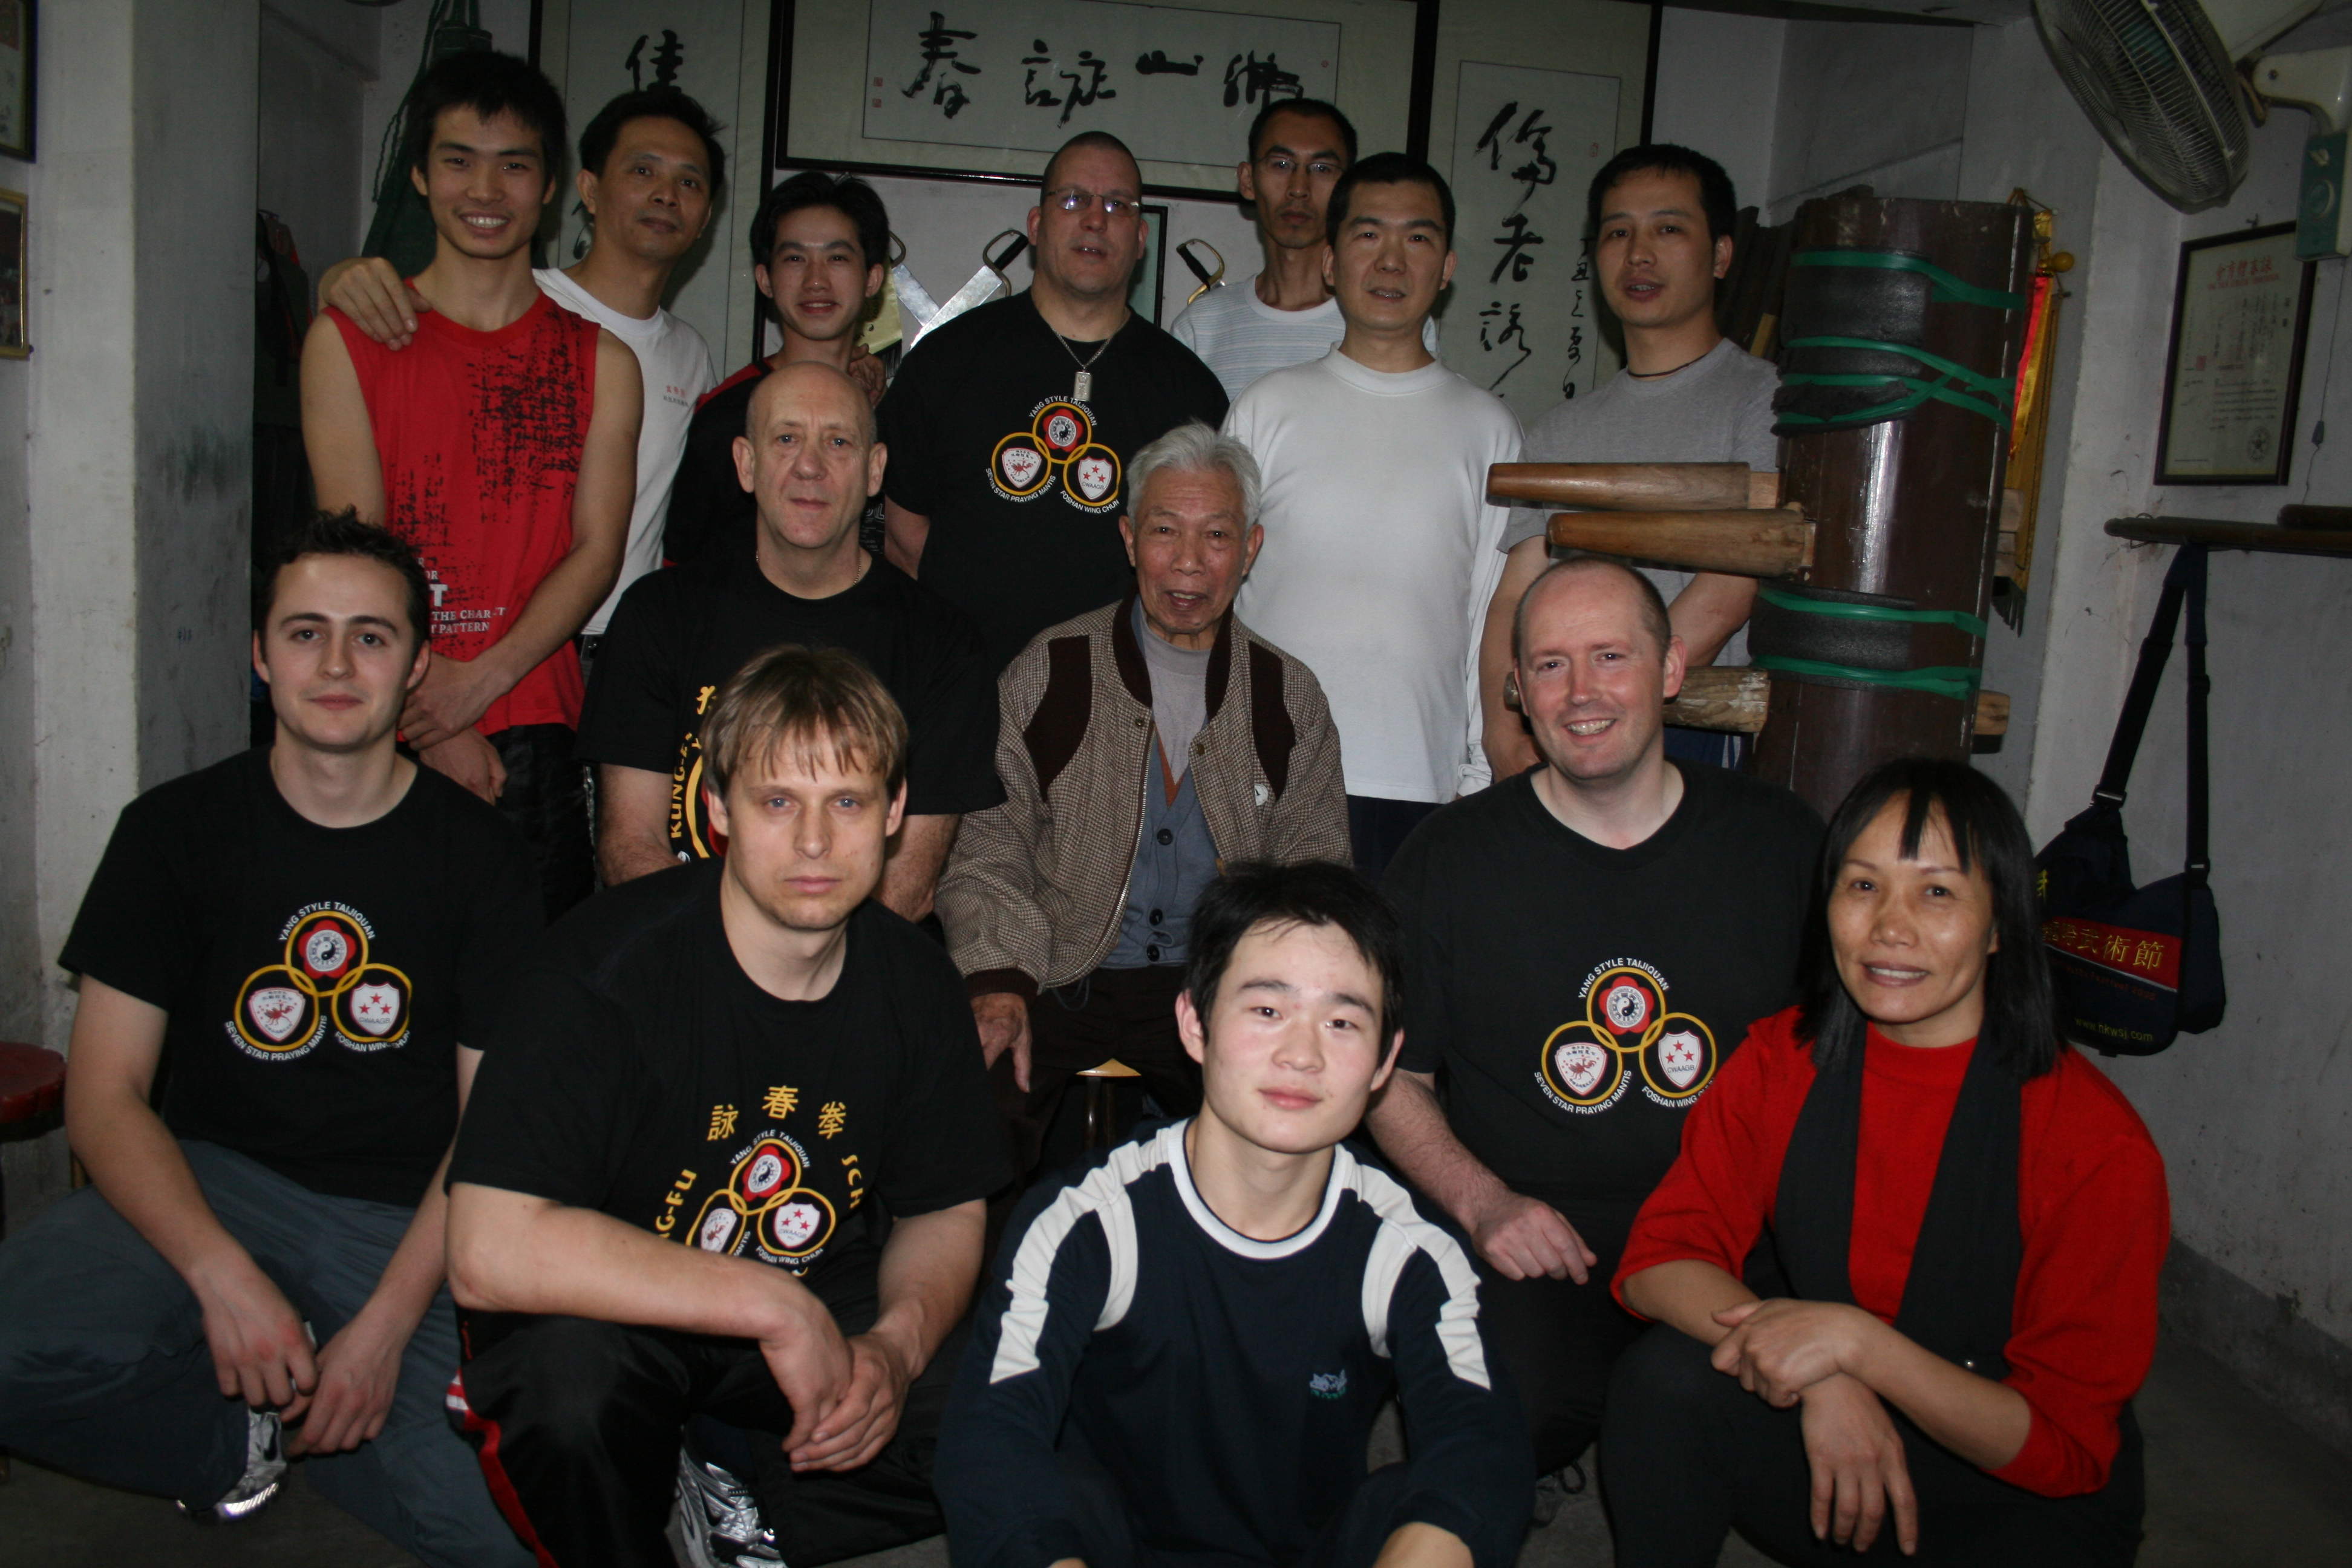 Sifu Dave  George with Master Derek Frearson and Grand Master Lun Gai at his school in Foshan